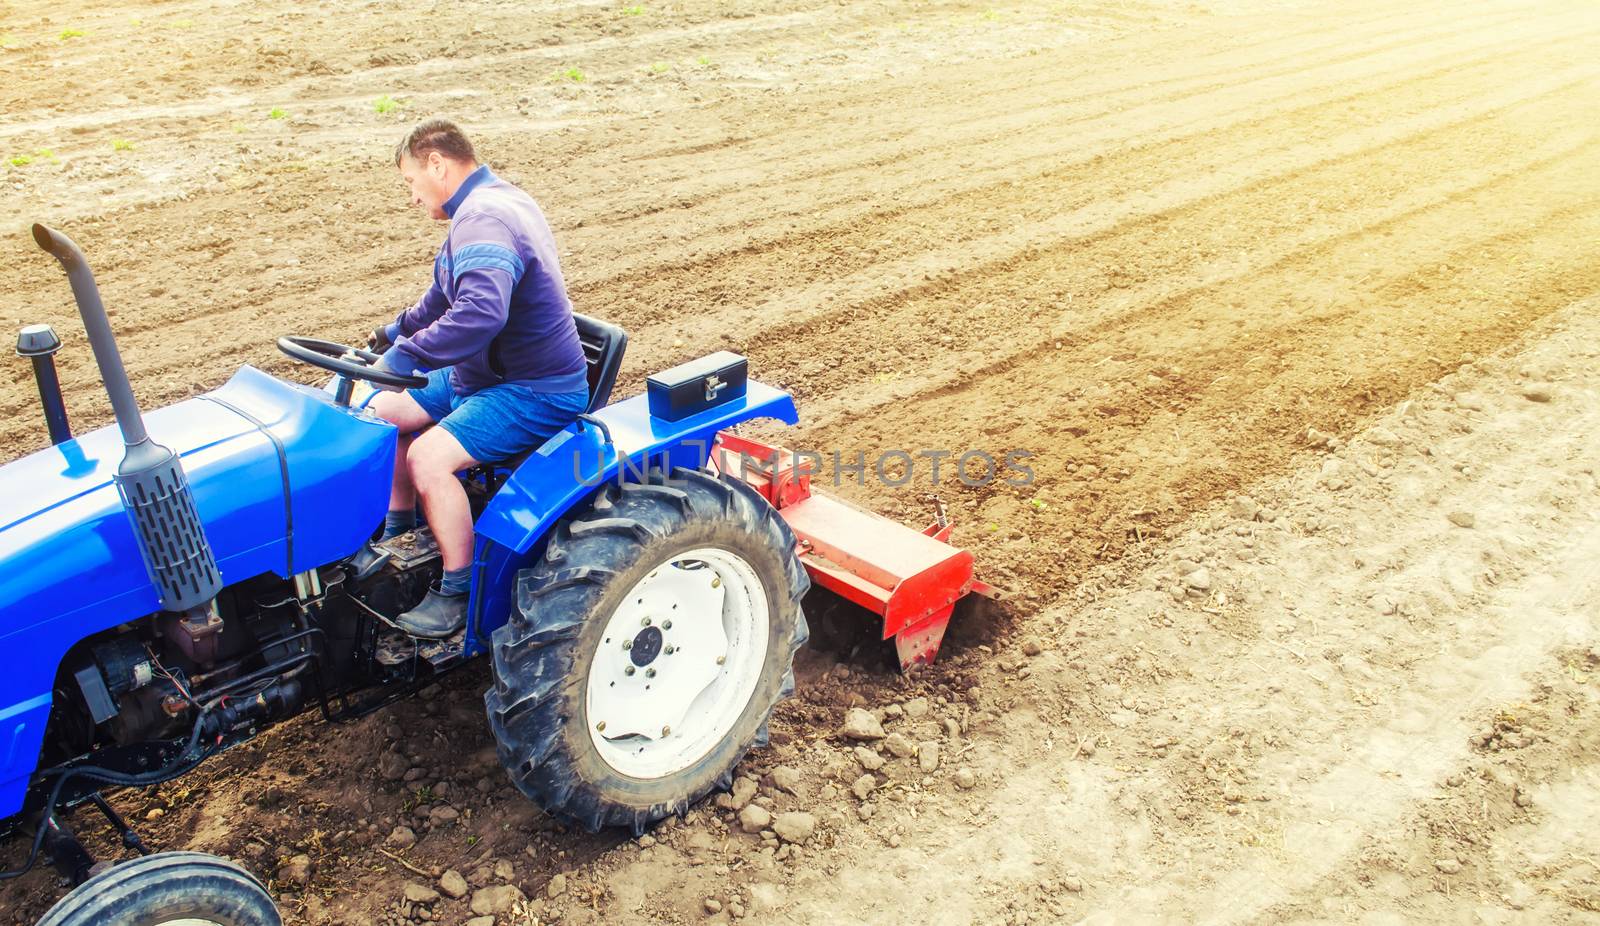 A farmer on a tractor cultivates a farm field. Field land preparation for new crop planting. Grinding and loosening soil, removing plants and roots from past harvest. Cultivation equipment. by iLixe48